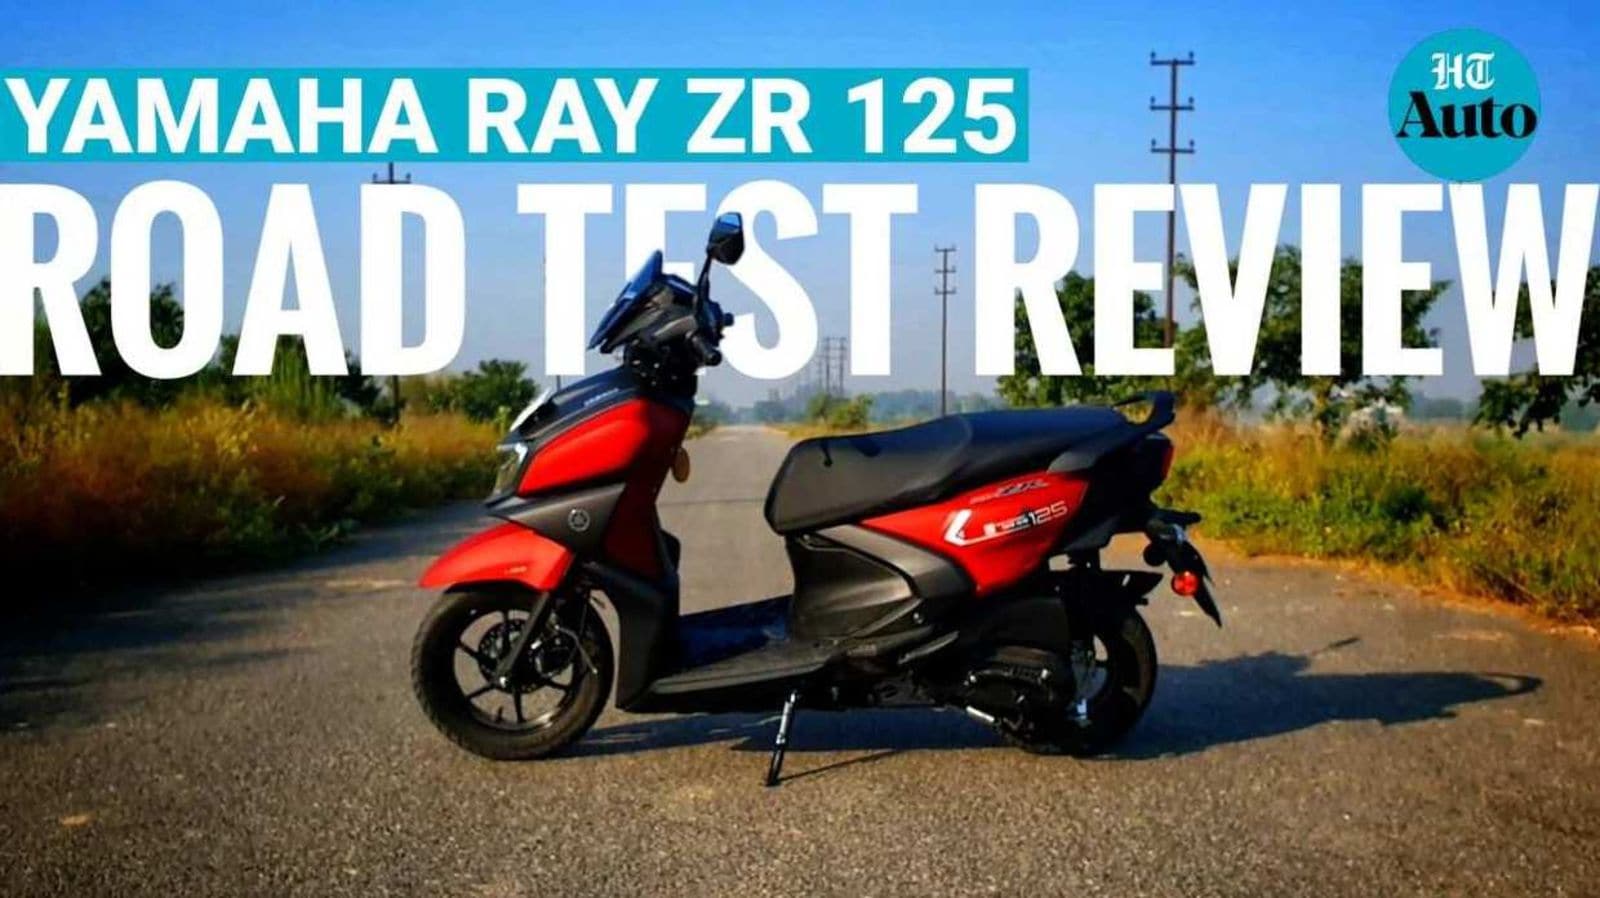 2020 Yamaha Ray ZR BS 6 road test review: Sporty scooter with